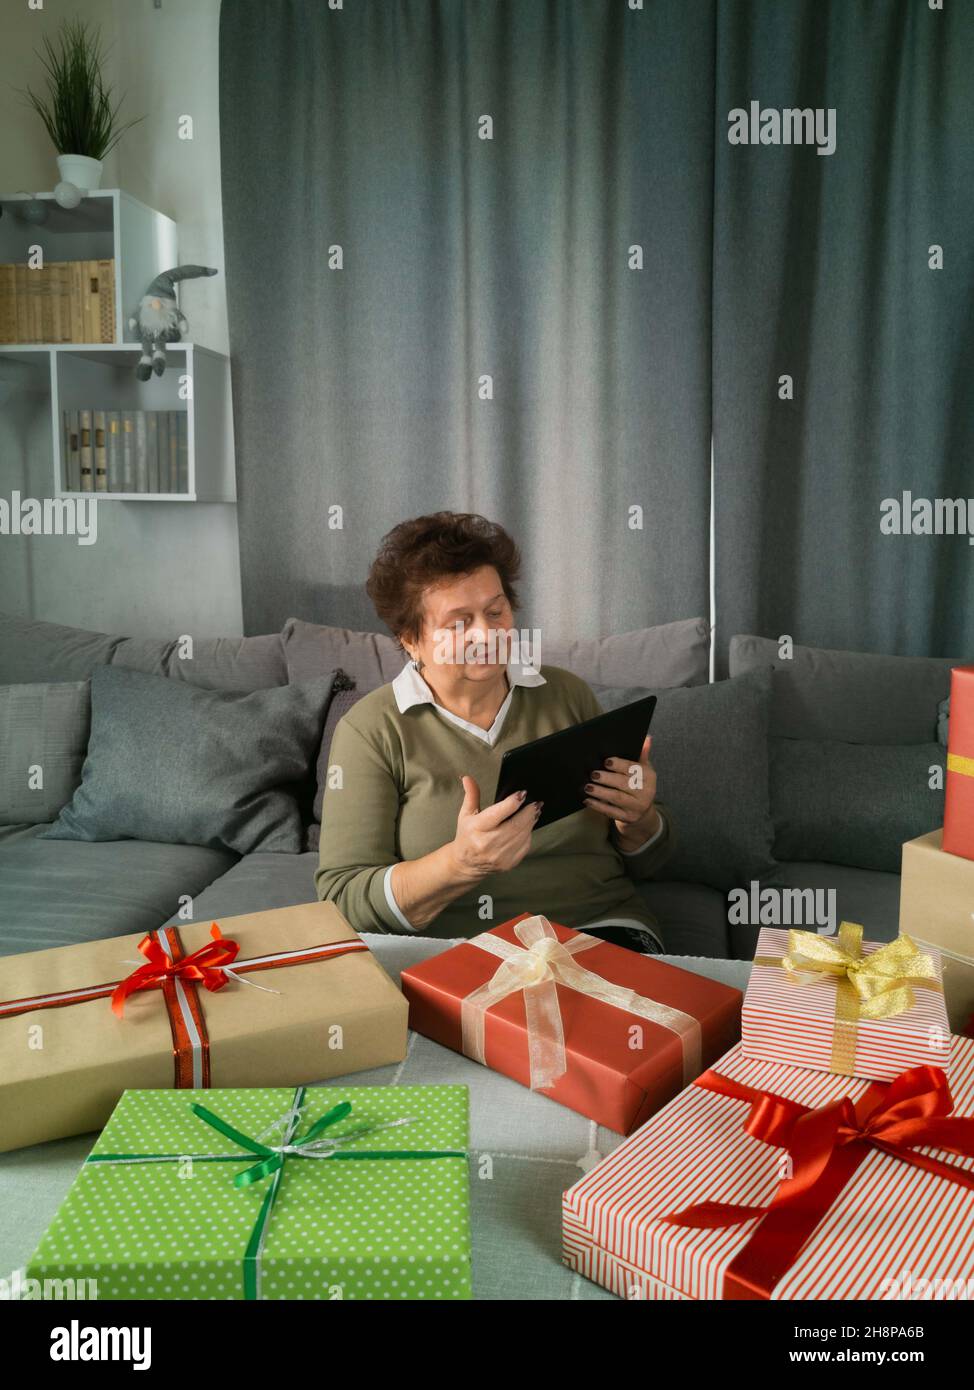 https://c8.alamy.com/comp/2H8PA6B/an-elderly-woman-is-packing-gifts-and-holding-a-tablet-in-her-hands-2H8PA6B.jpg